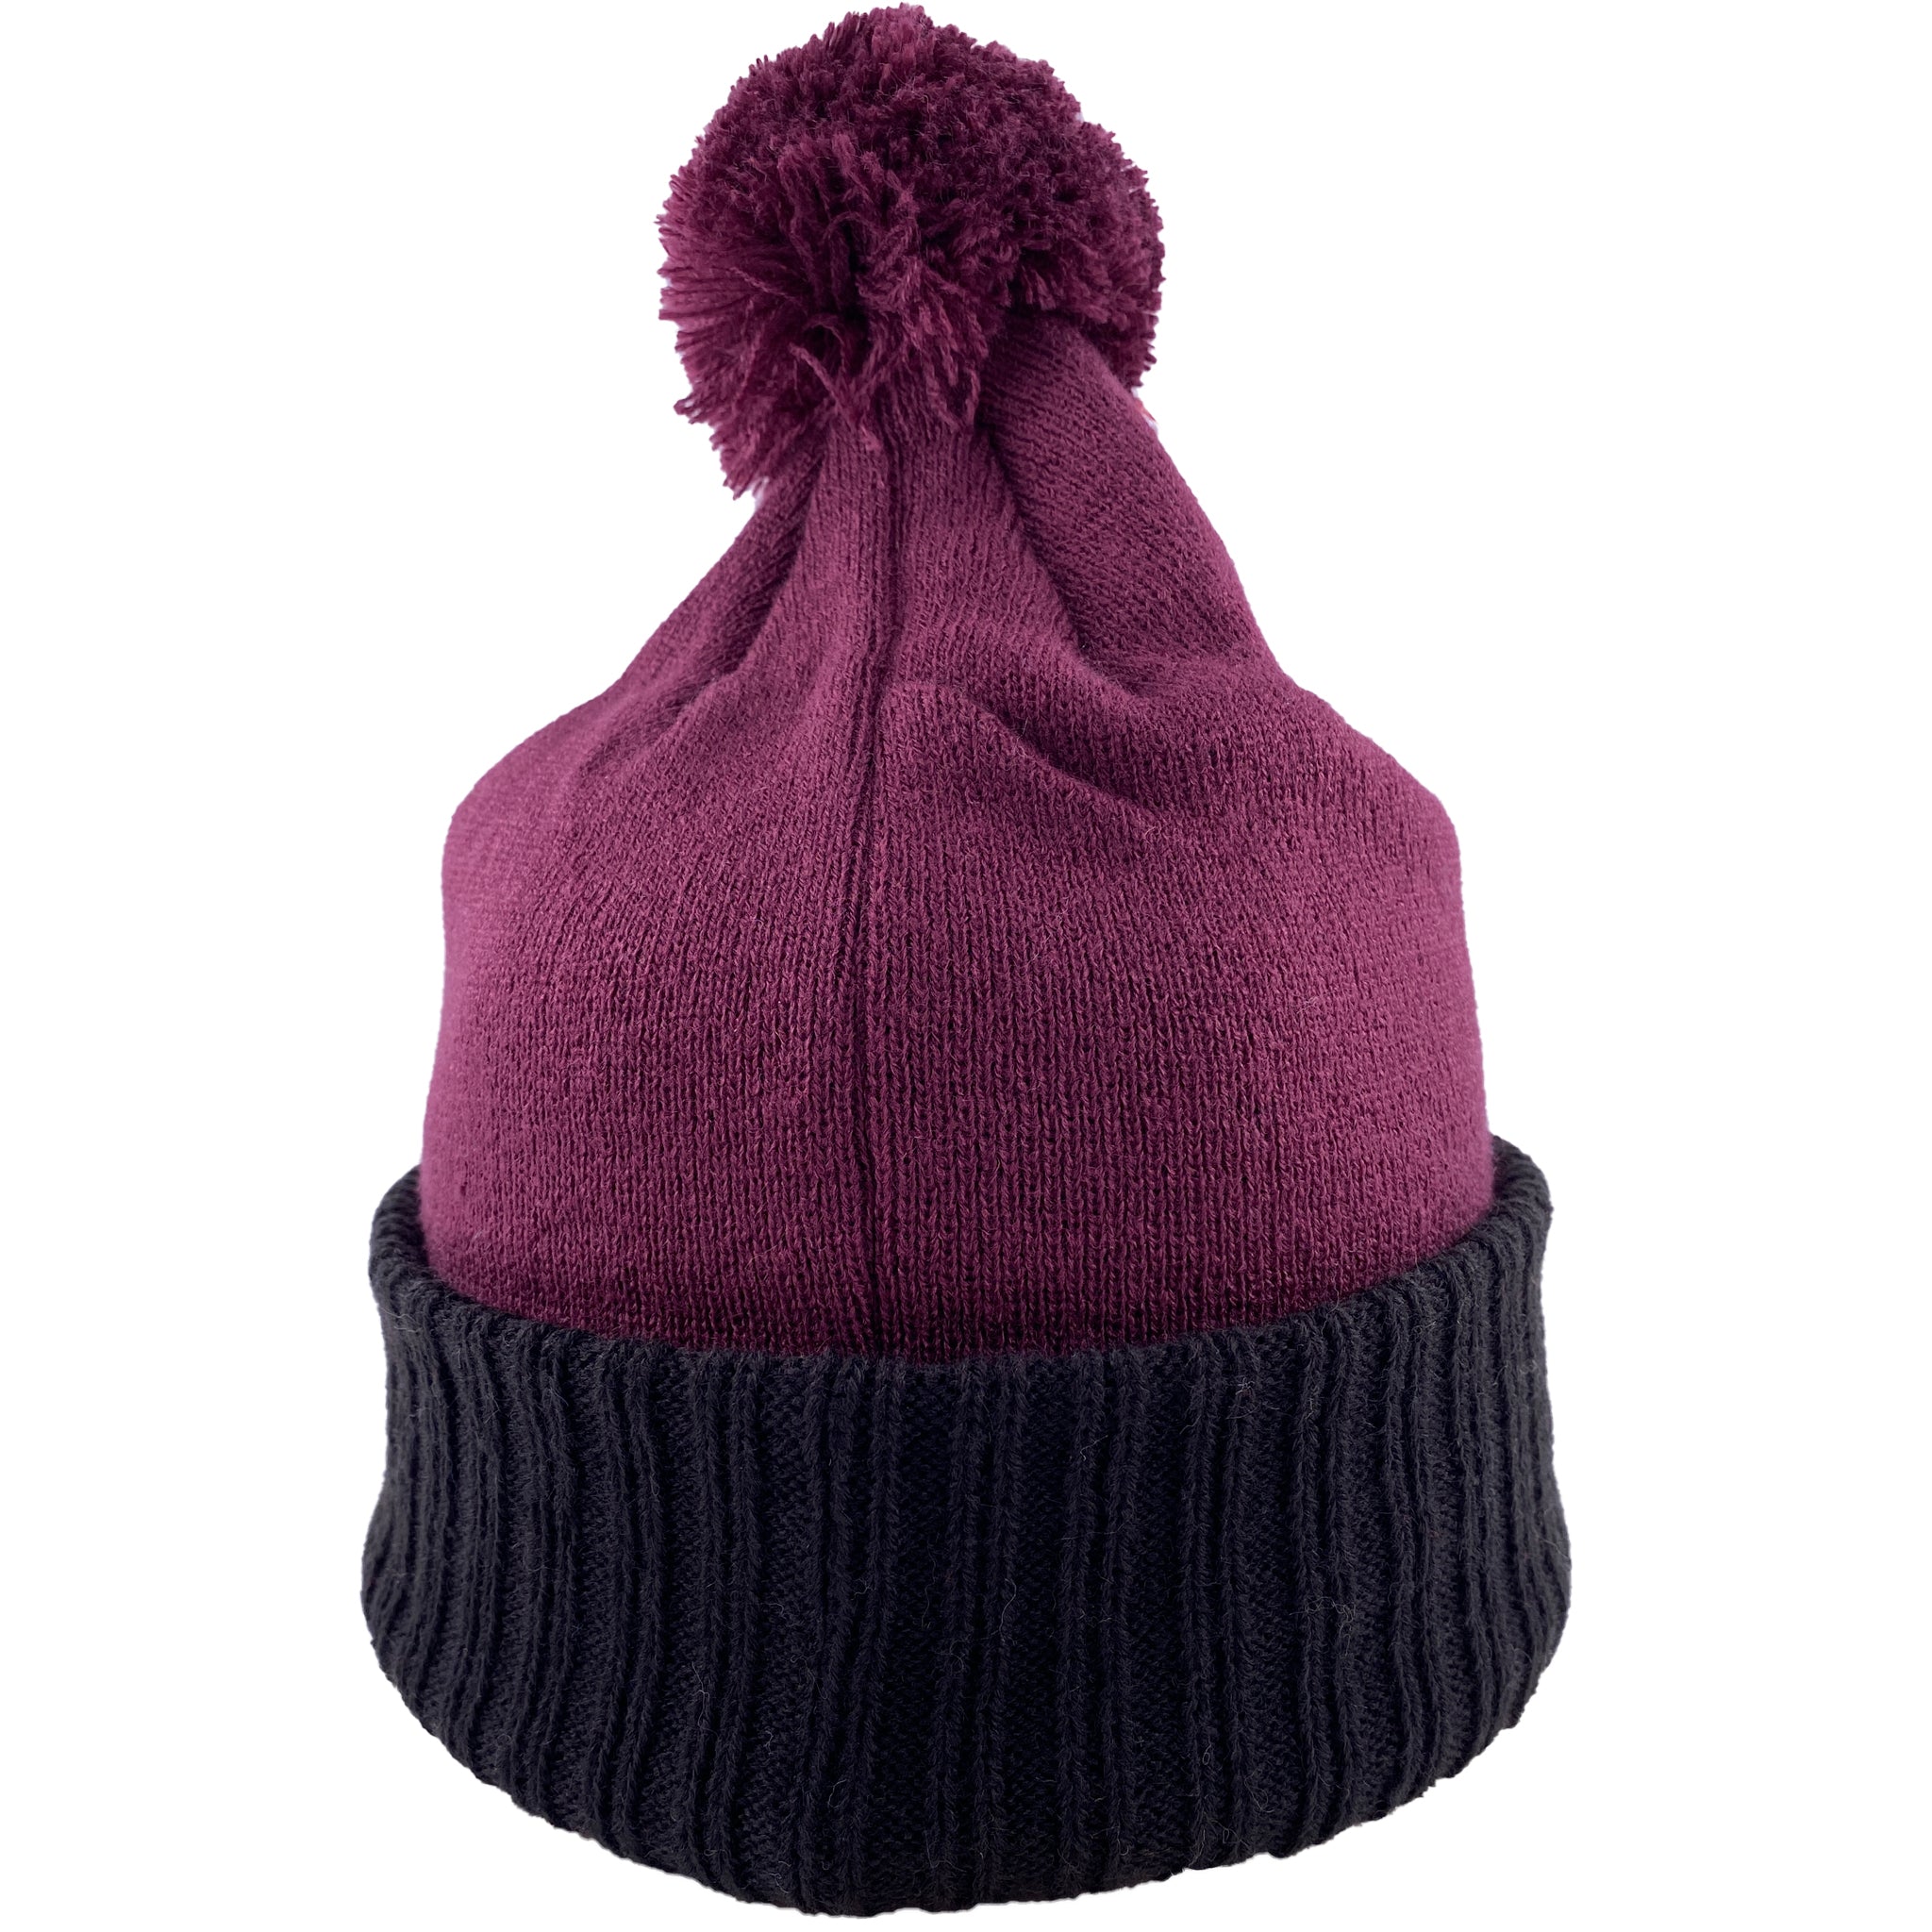 Champion Men's Beanie with Pom – That Shoe Store and More